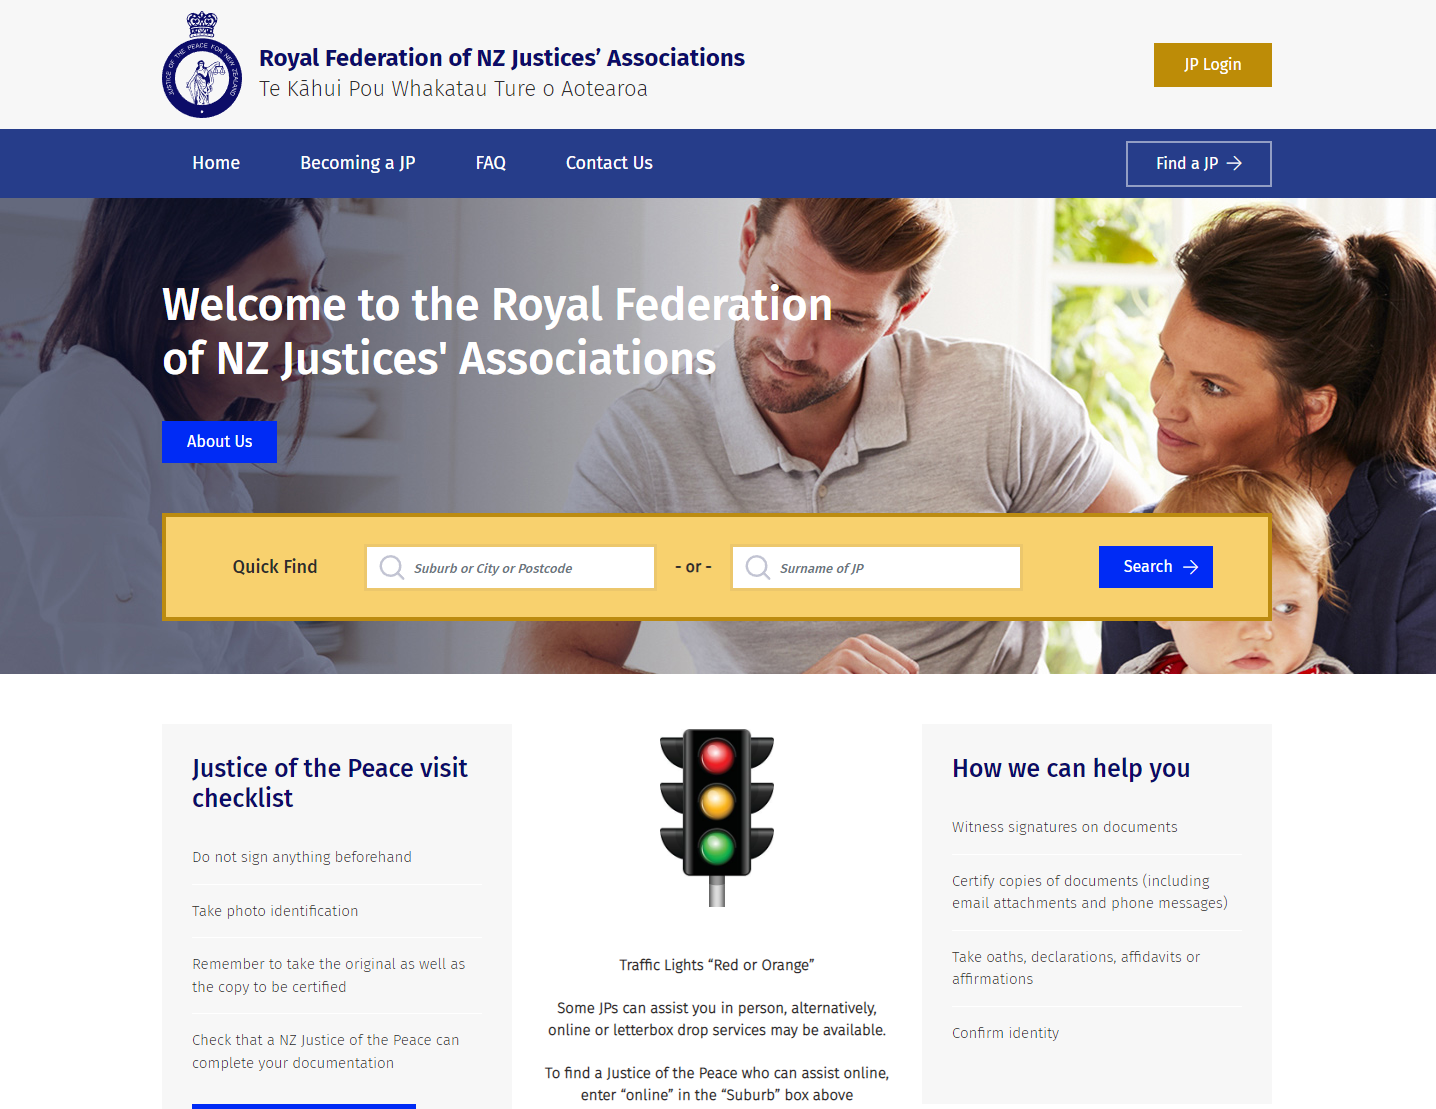 Royal Federation of NZ Justices' Associations